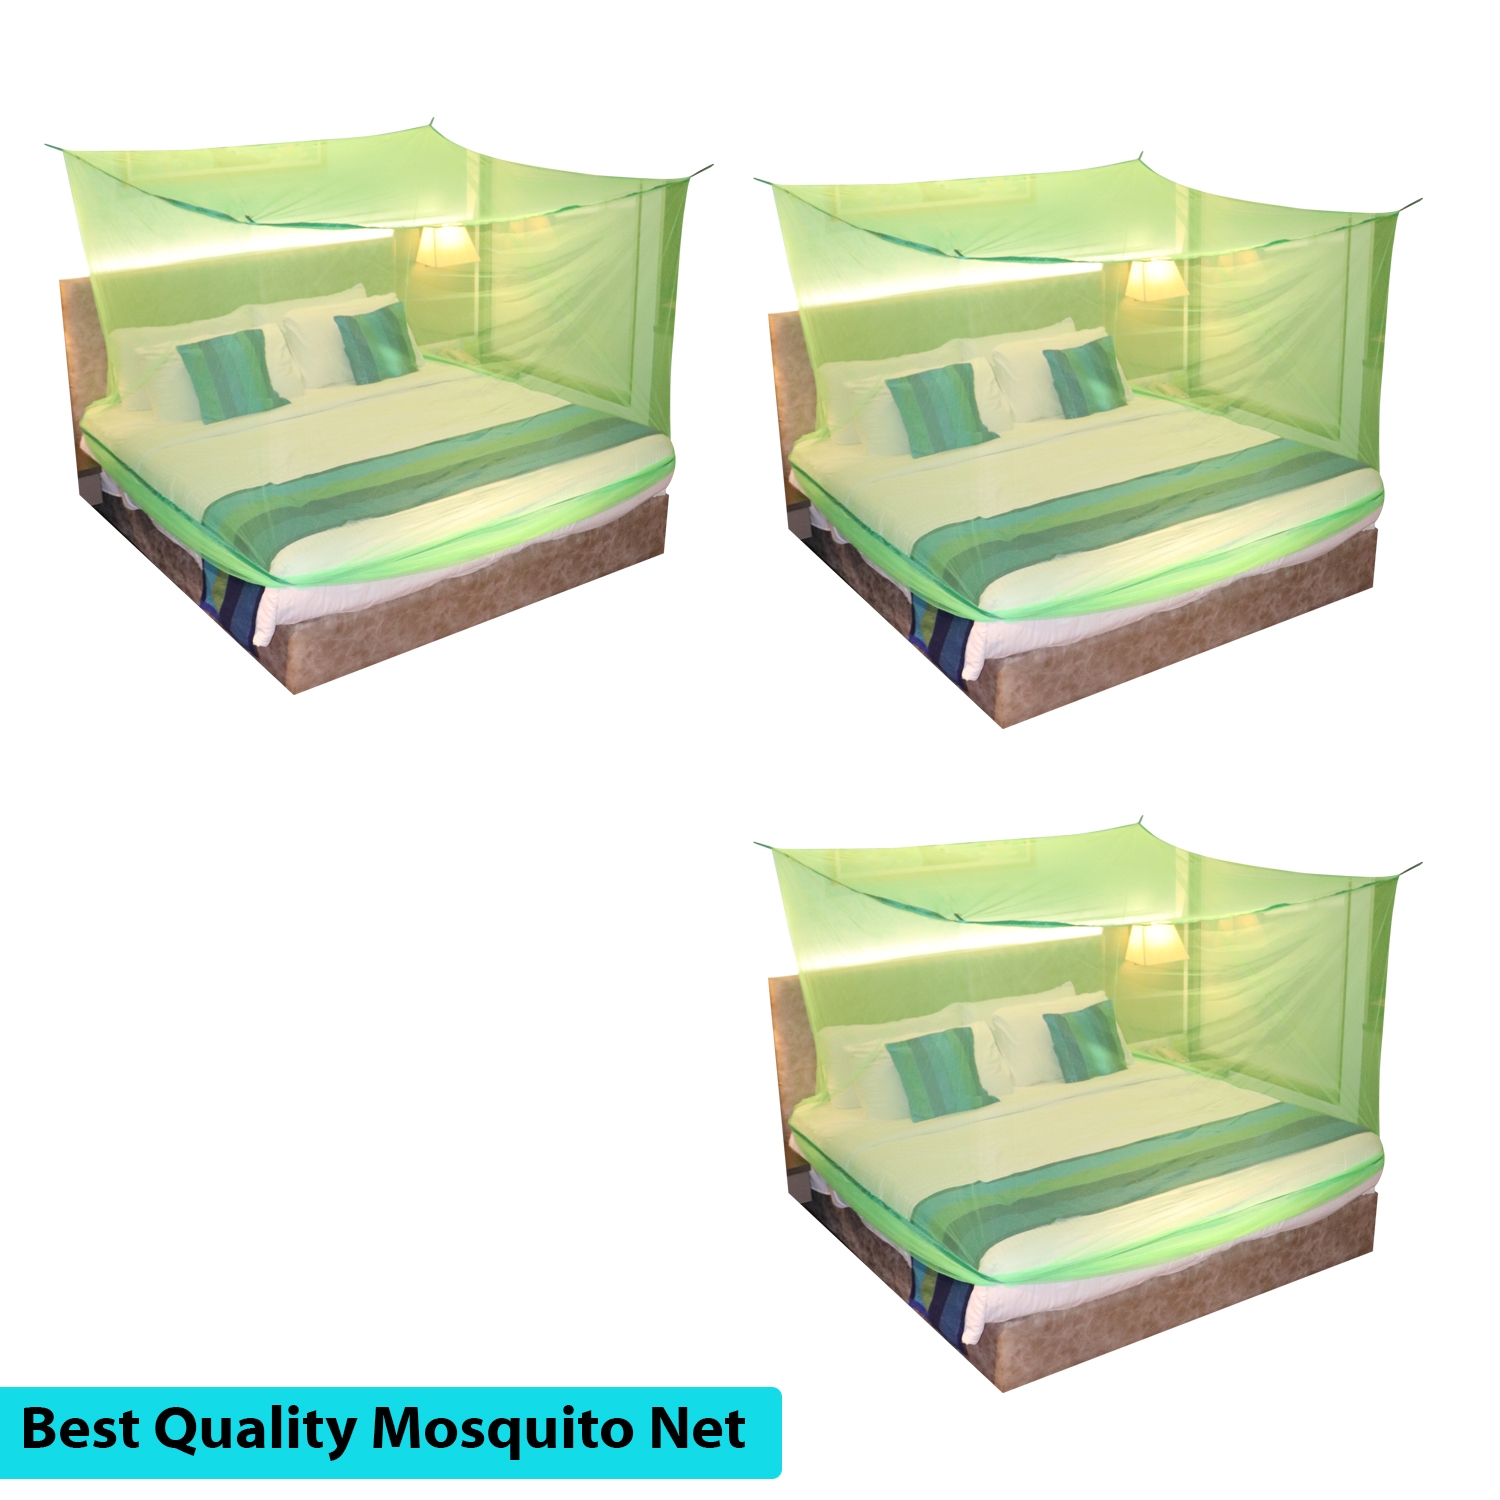 Paola Jewels | Mosquito Net for Double Bed, King-Size, Square Hanging Foldable Polyester Net Green Pack of 3 0